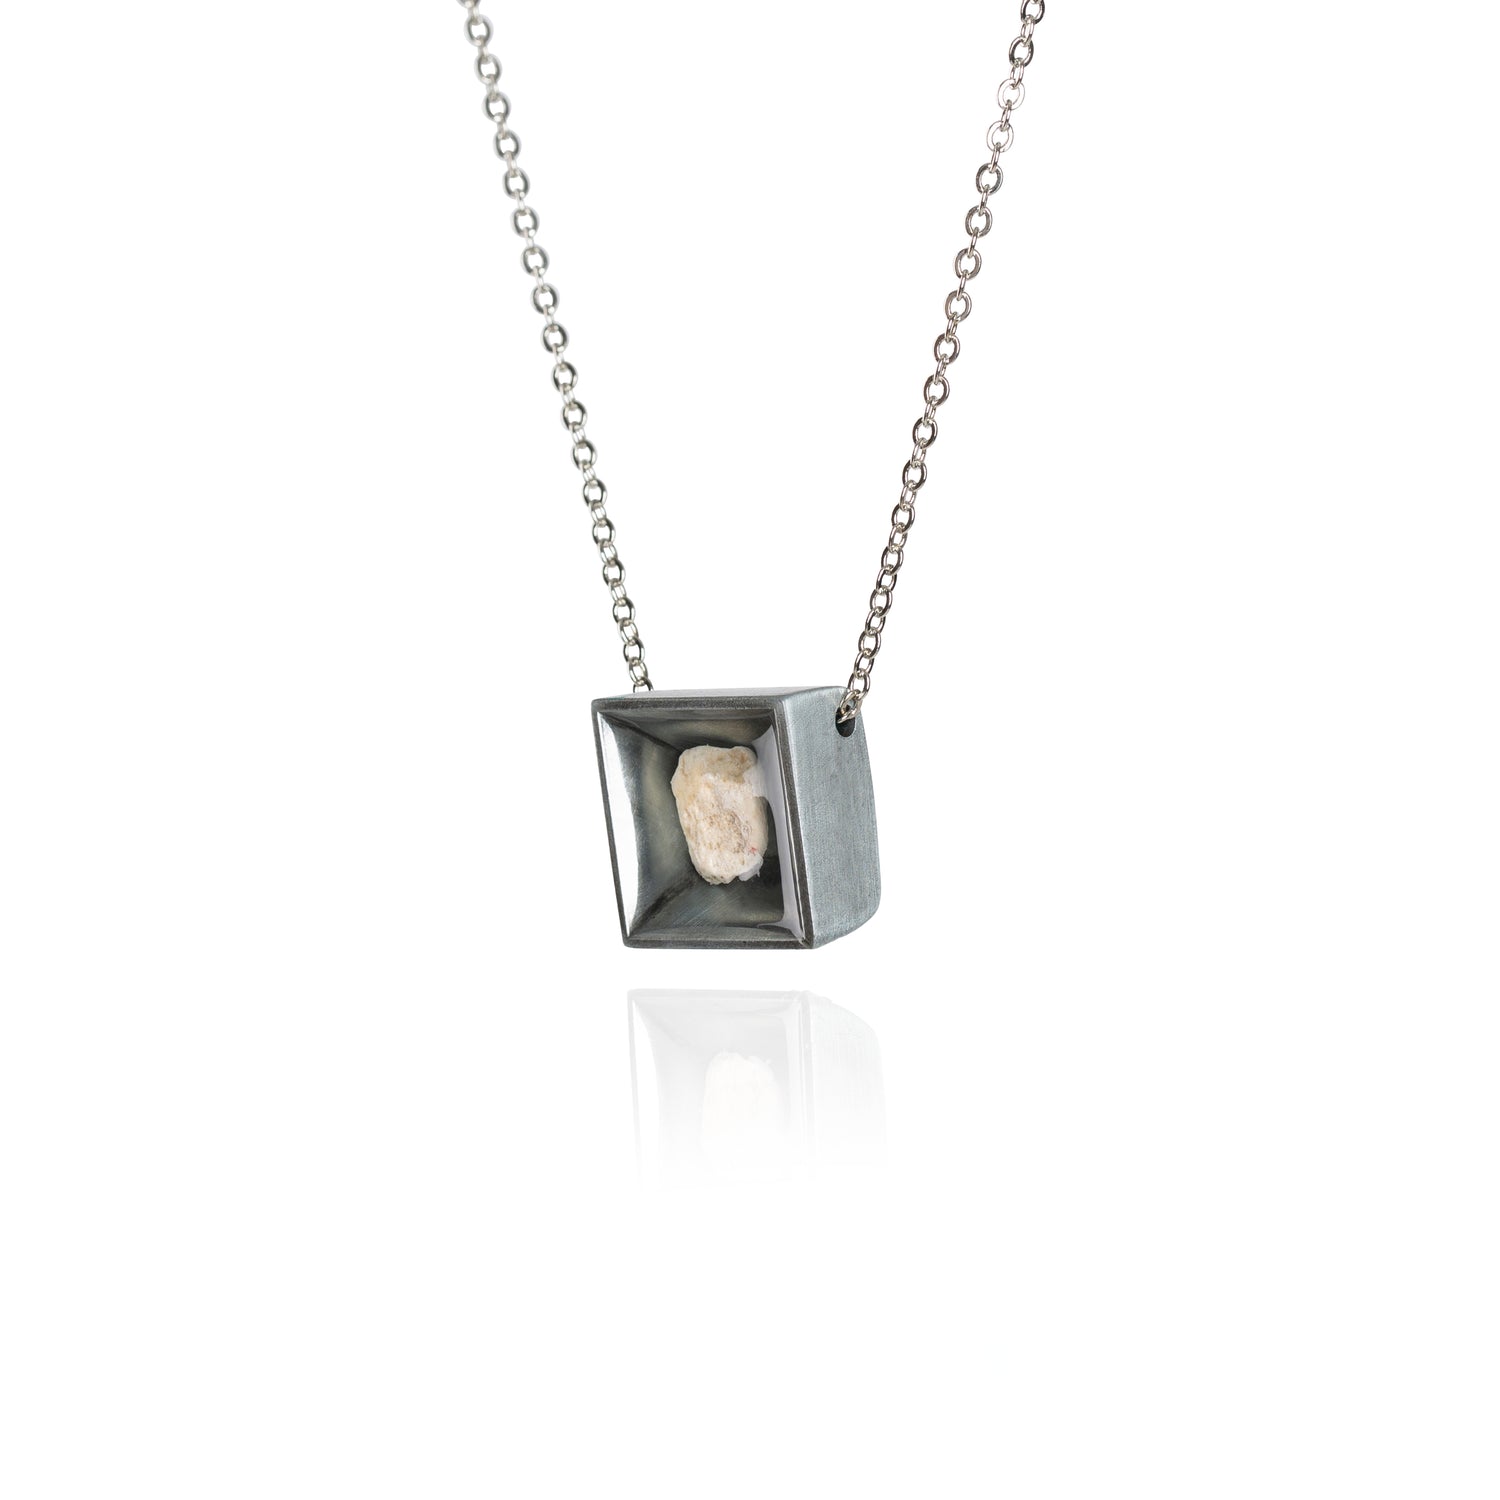 A side view of a small natural tan stone sitting in the middle of a square shaped metal pendant in a dark silver color. The pendant is hanging on a silver chain.